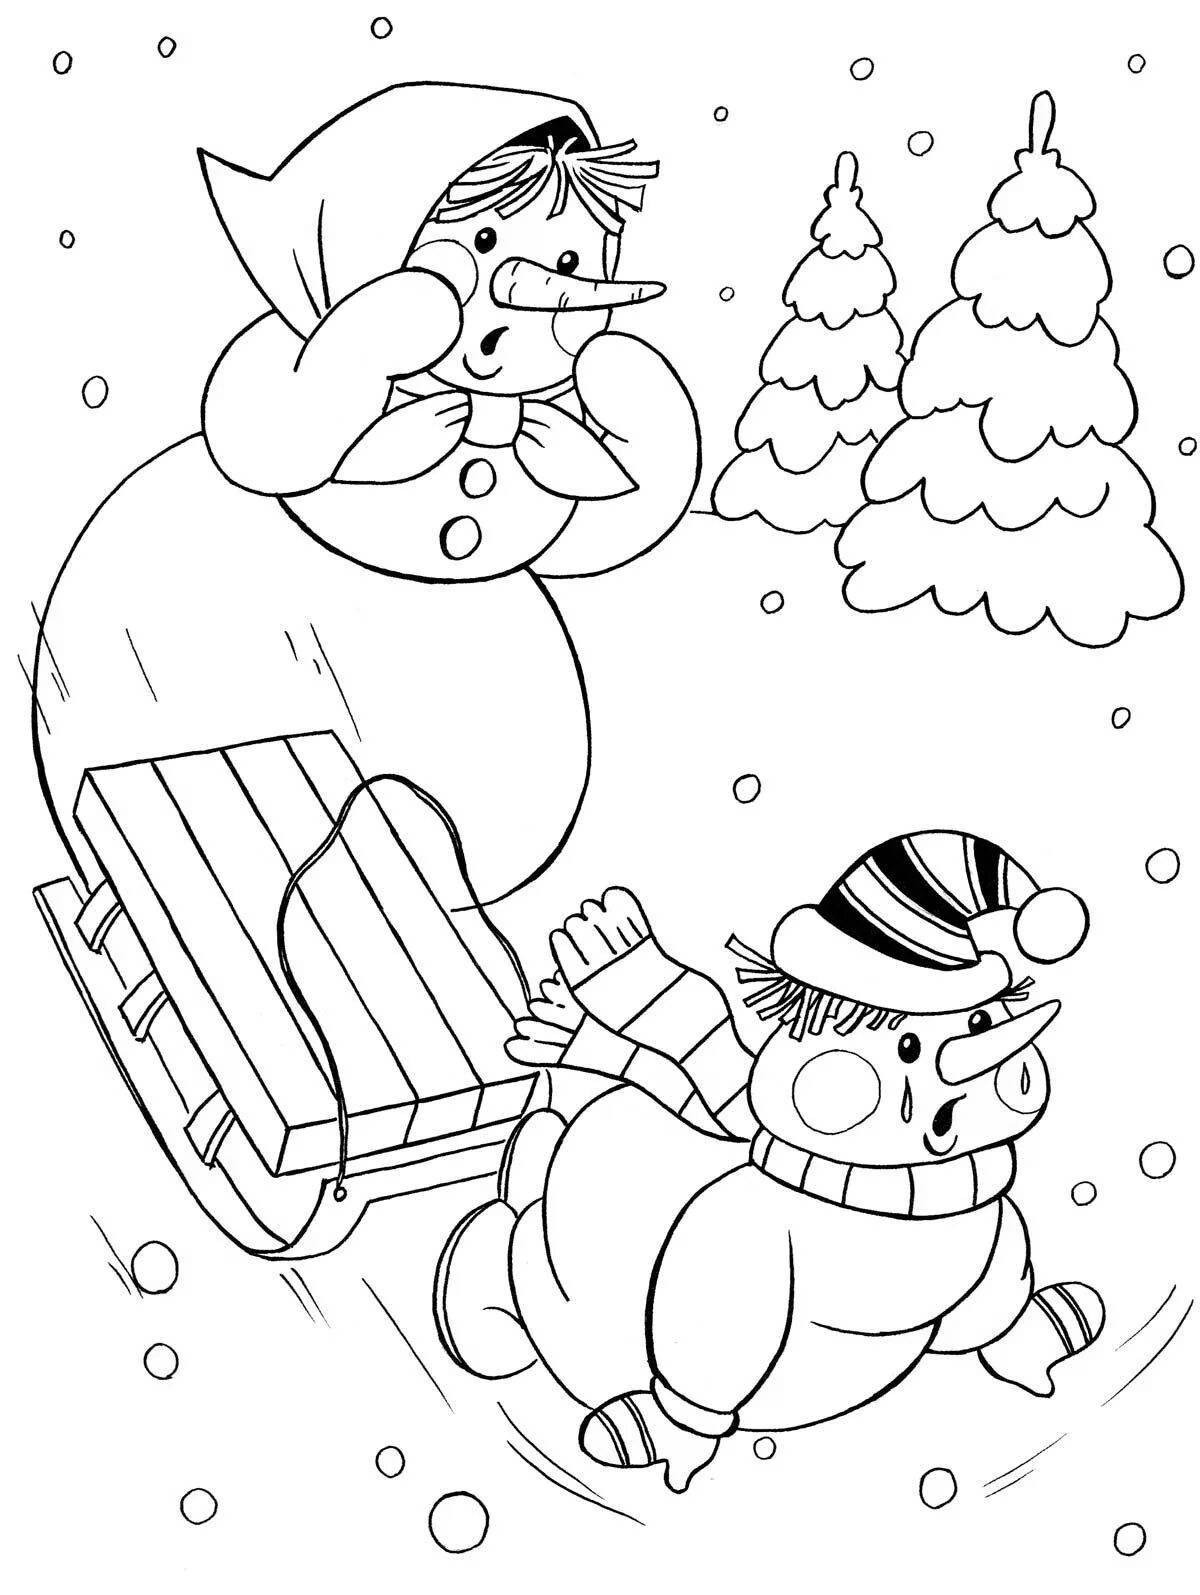 Coloring page playful snowman on skis